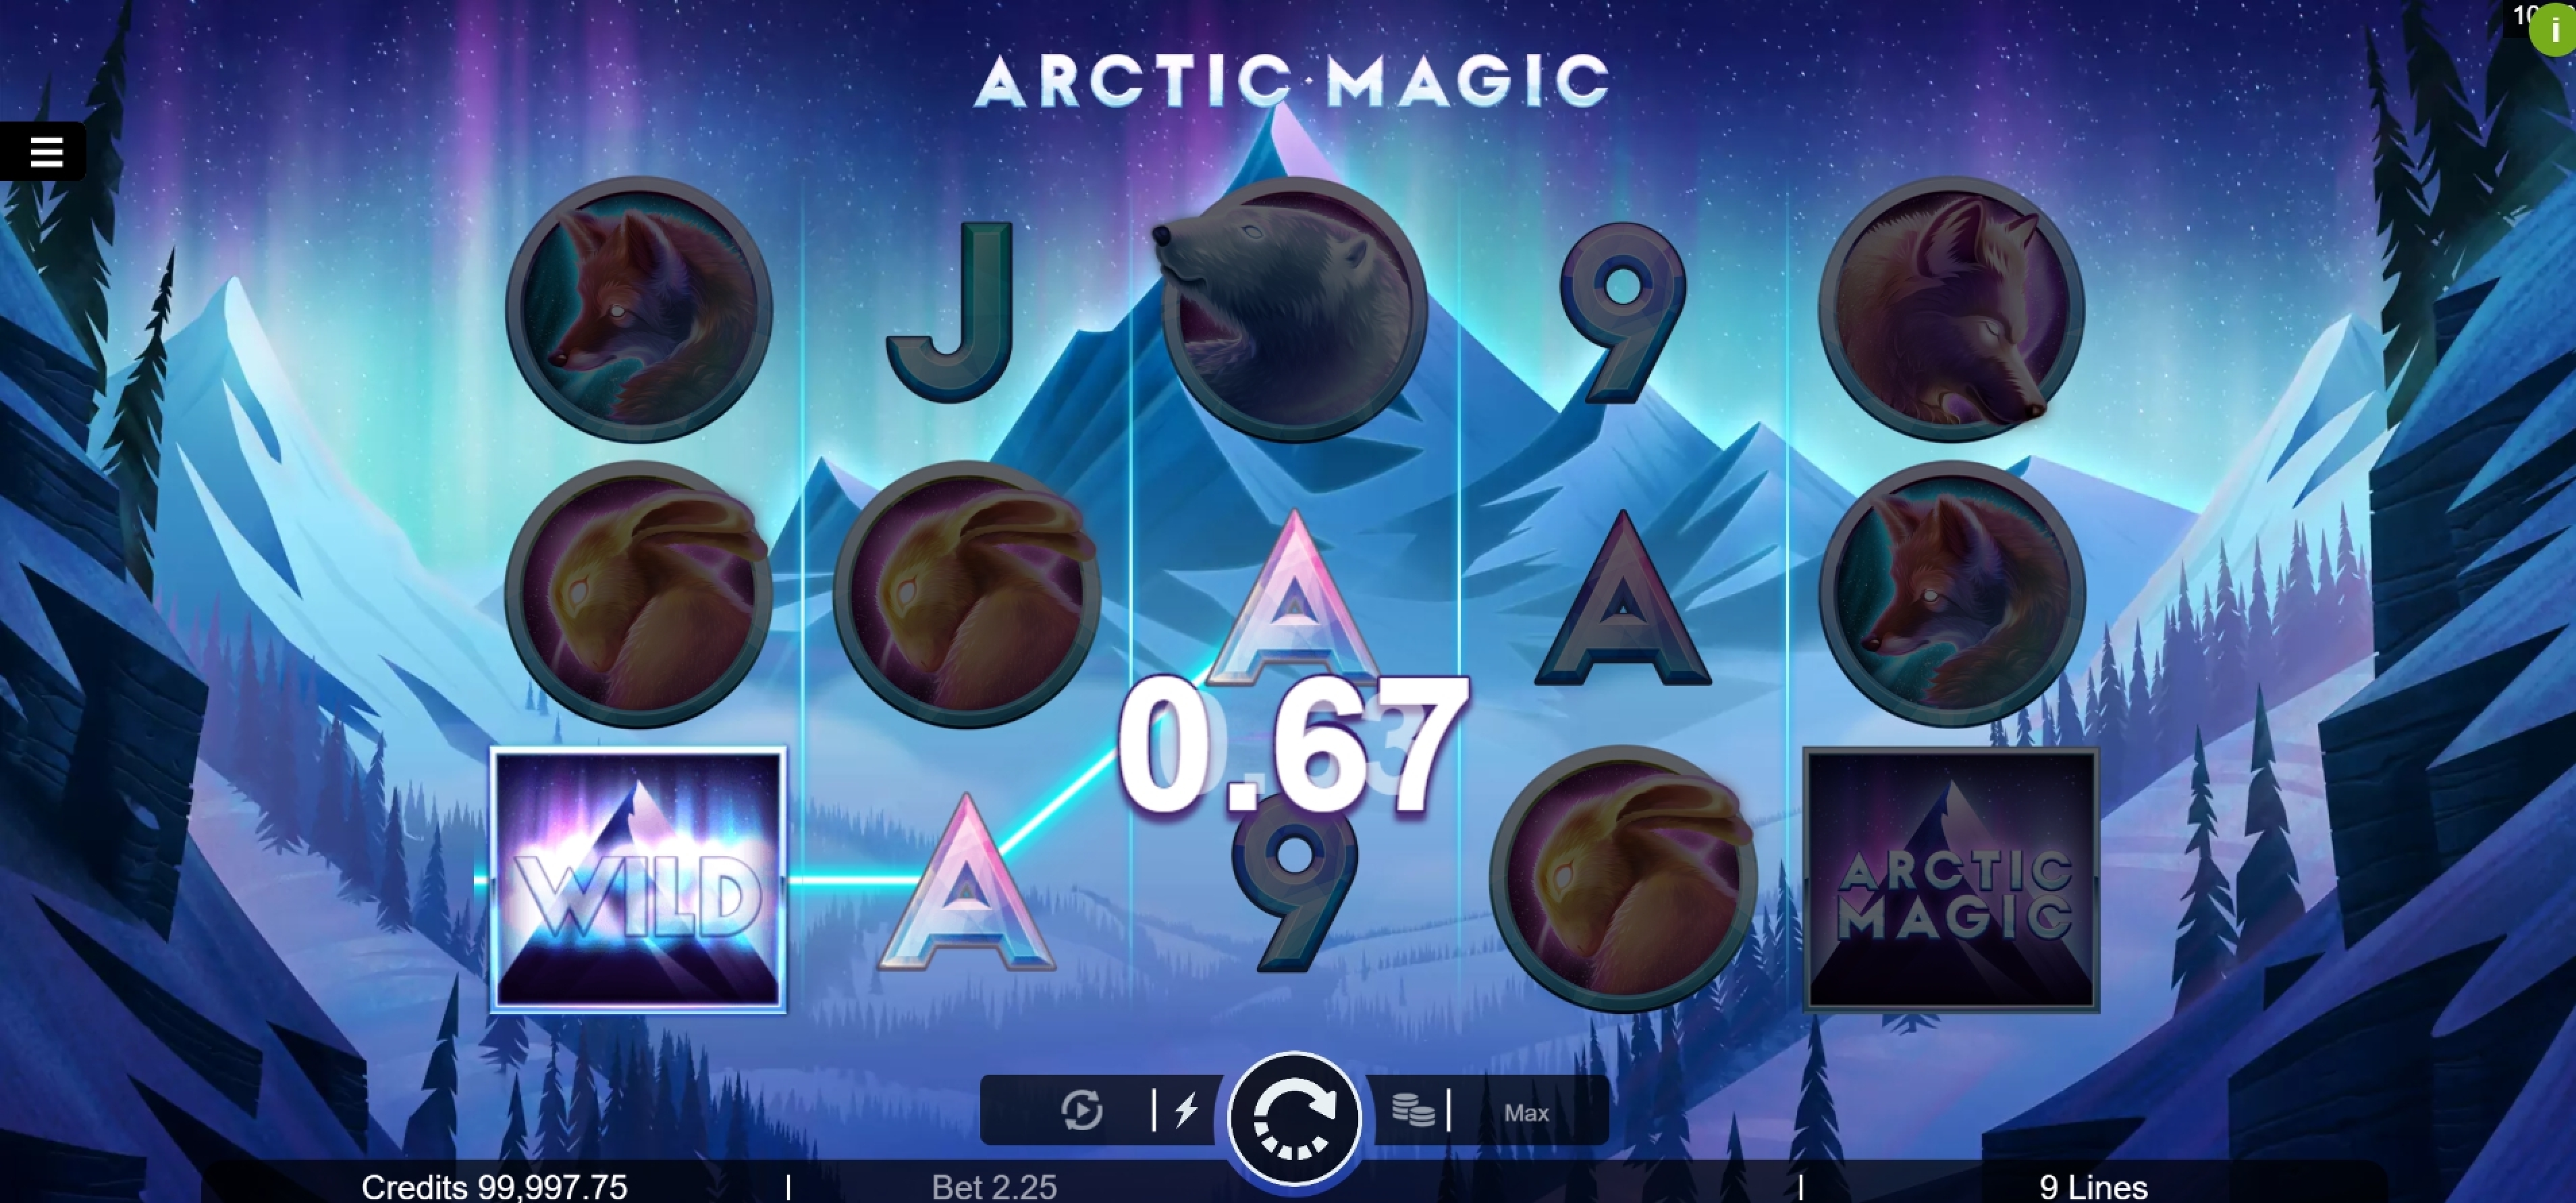 Win Money in Arctic Magic Free Slot Game by Microgaming